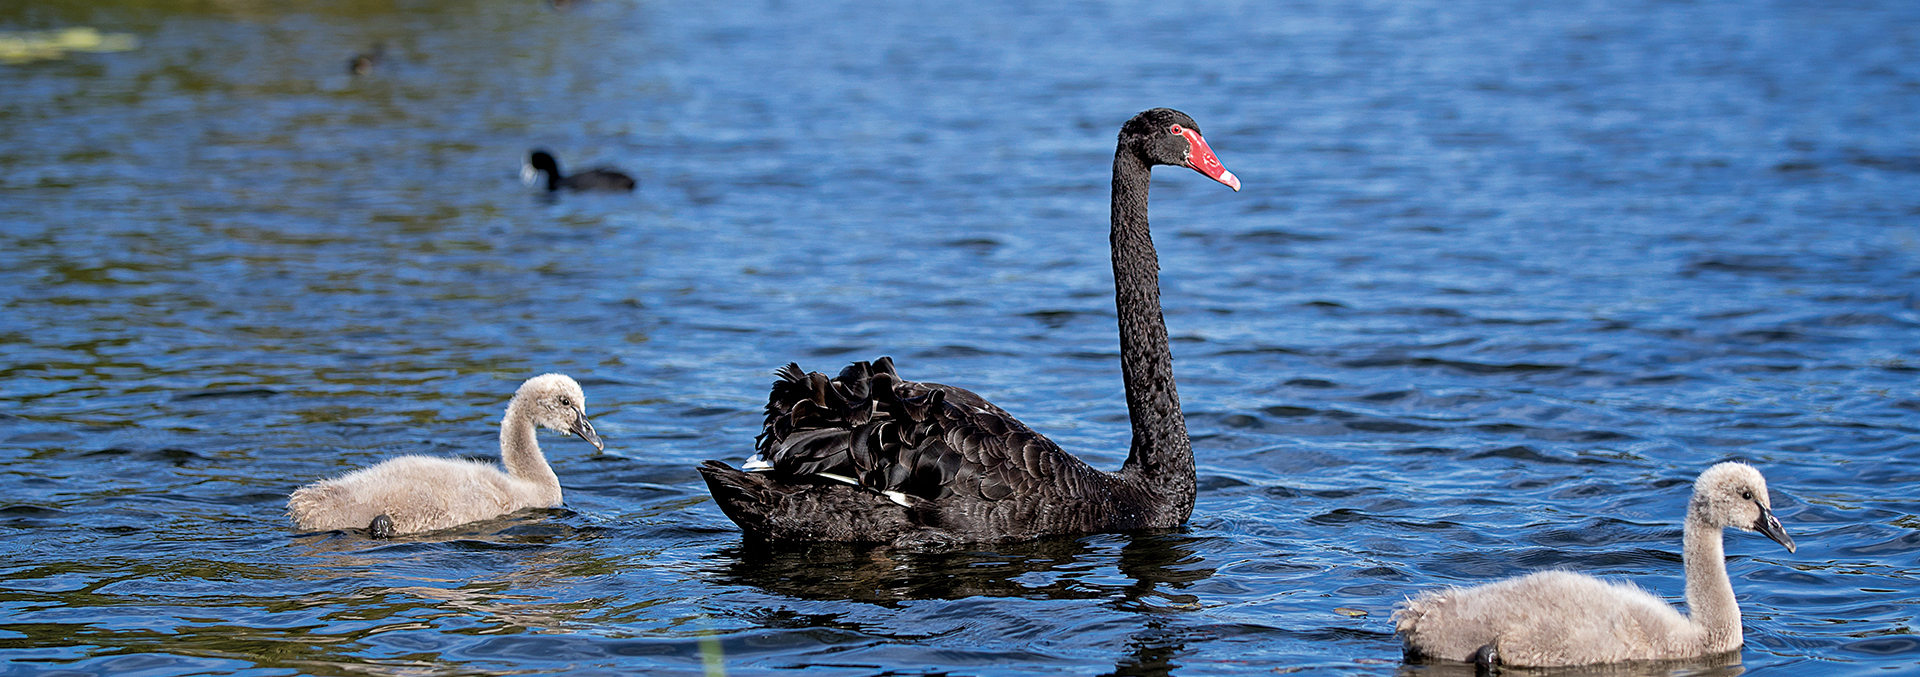 Halcyon Parks black swan on a lake with 2 young. 